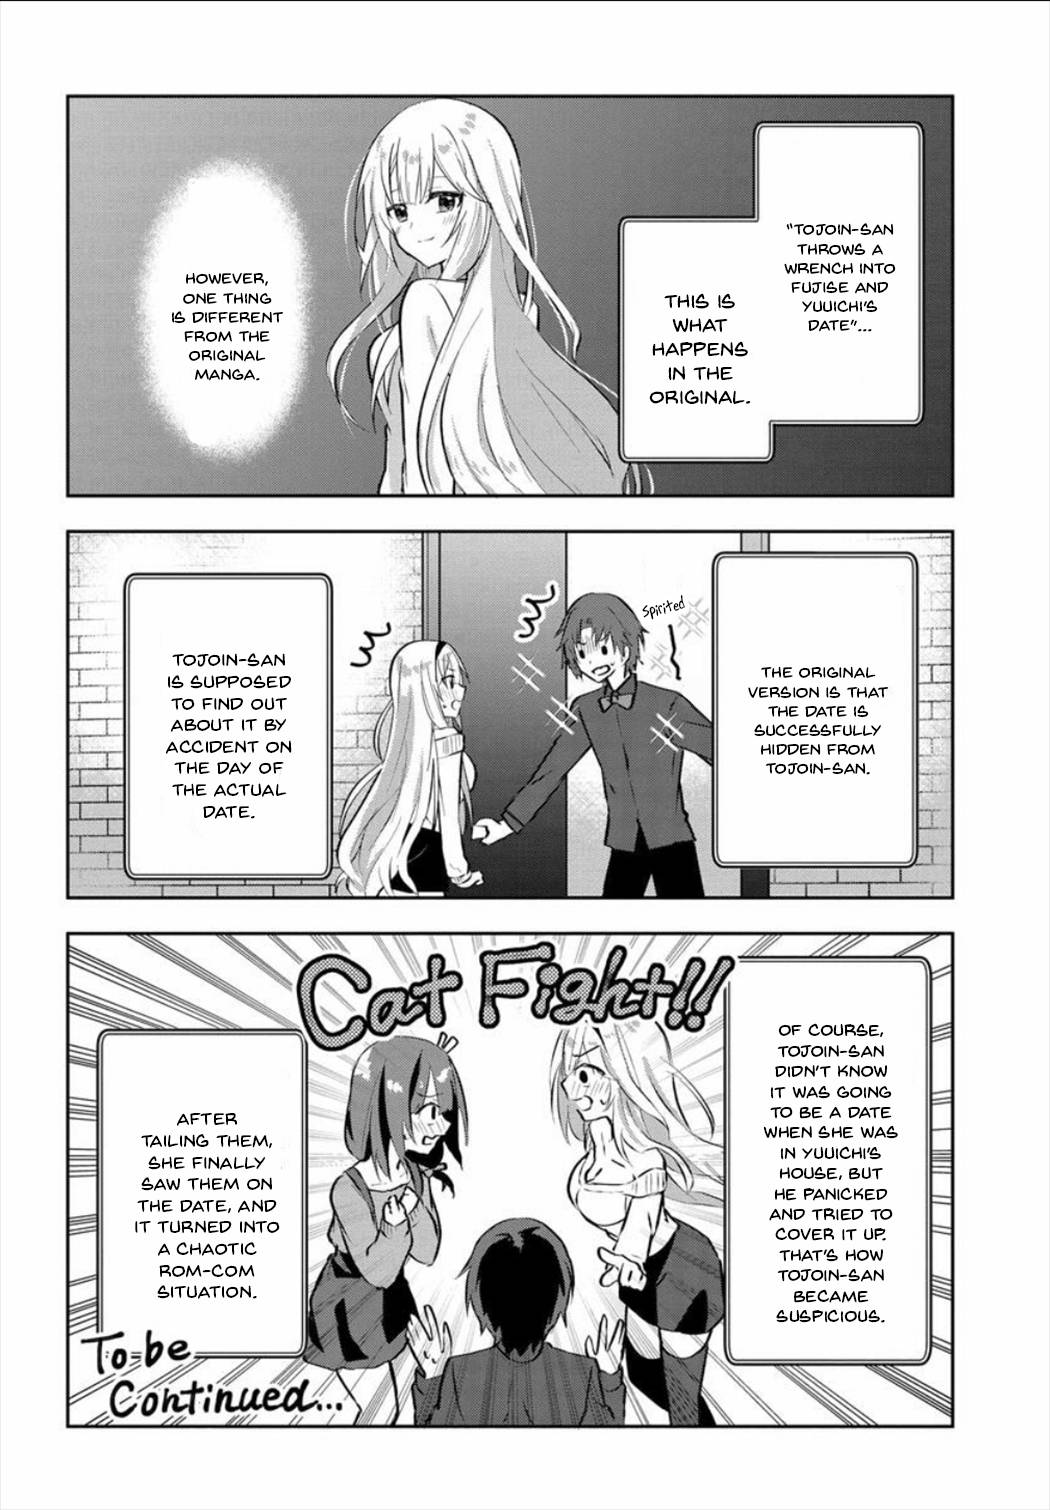 Since I’Ve Entered The World Of Romantic Comedy Manga, I’Ll Do My Best To Make The Losing Heroine Happy - chapter 4.2 - #5